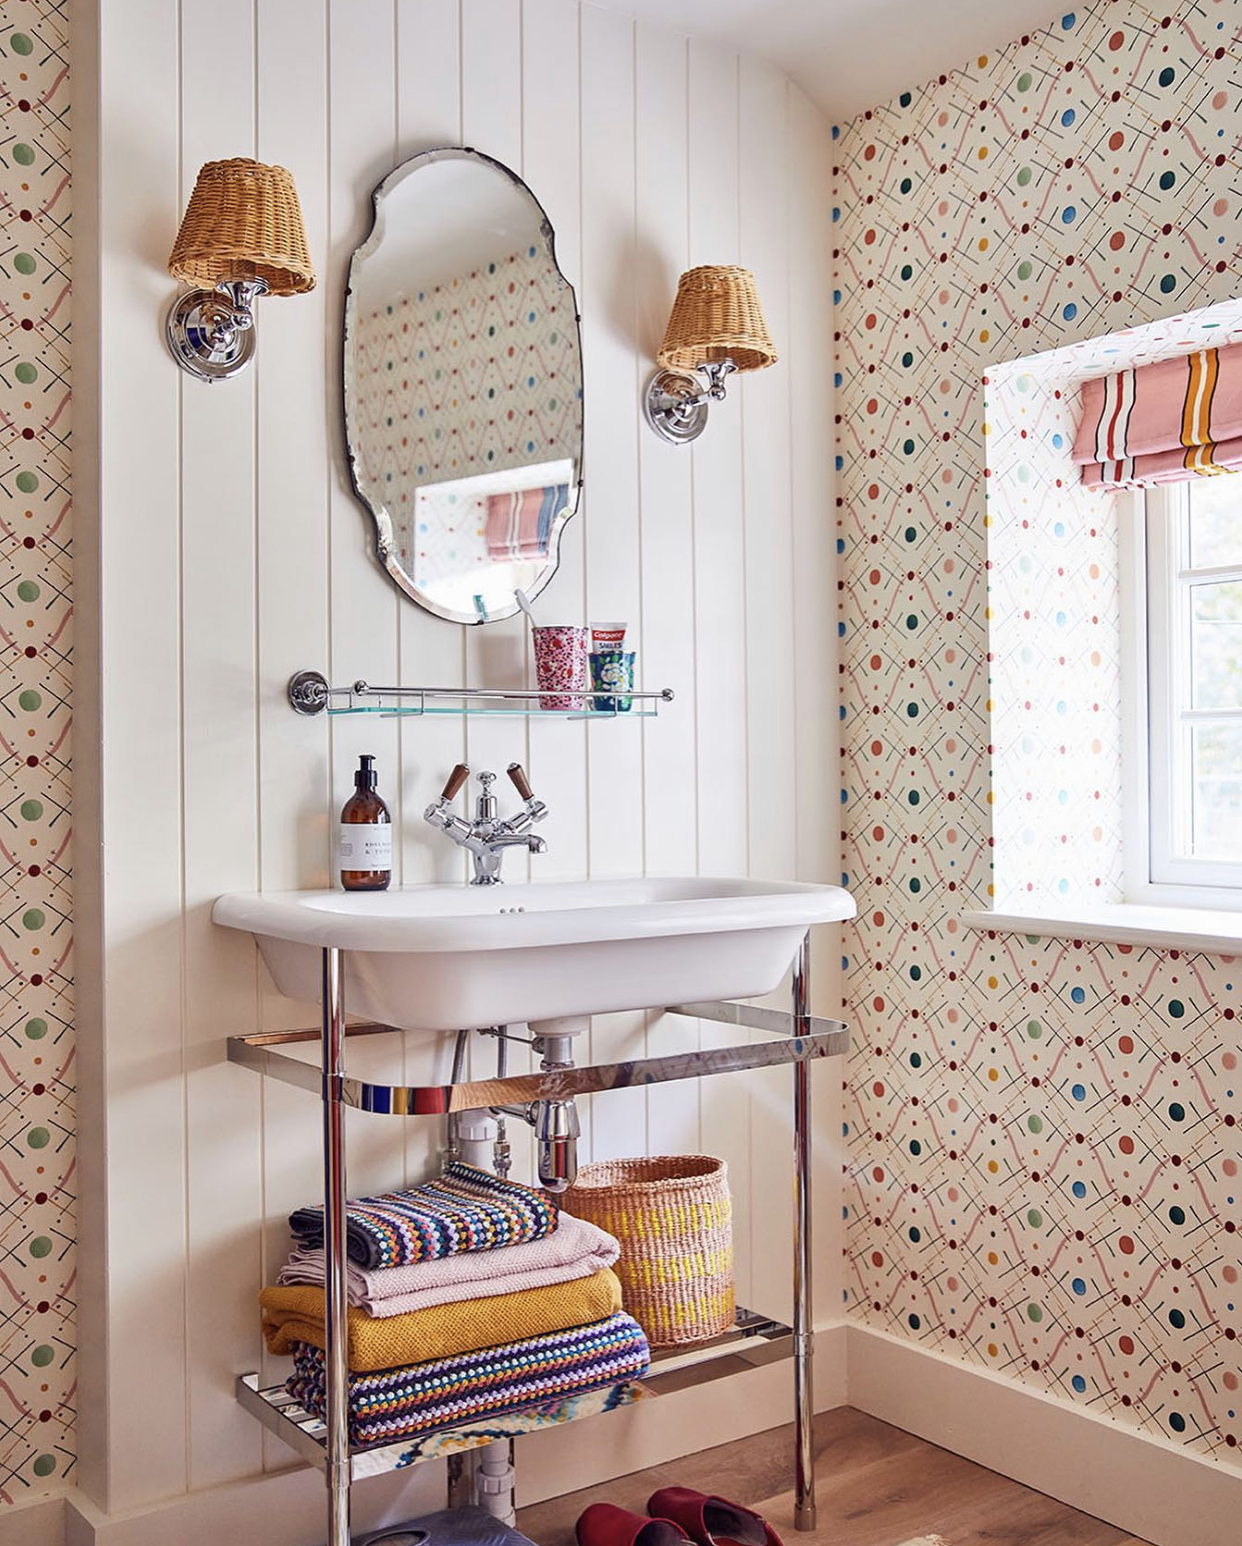 tongue and groove bathroom at Sophie Robinson Interiors, image by Alun Callendar